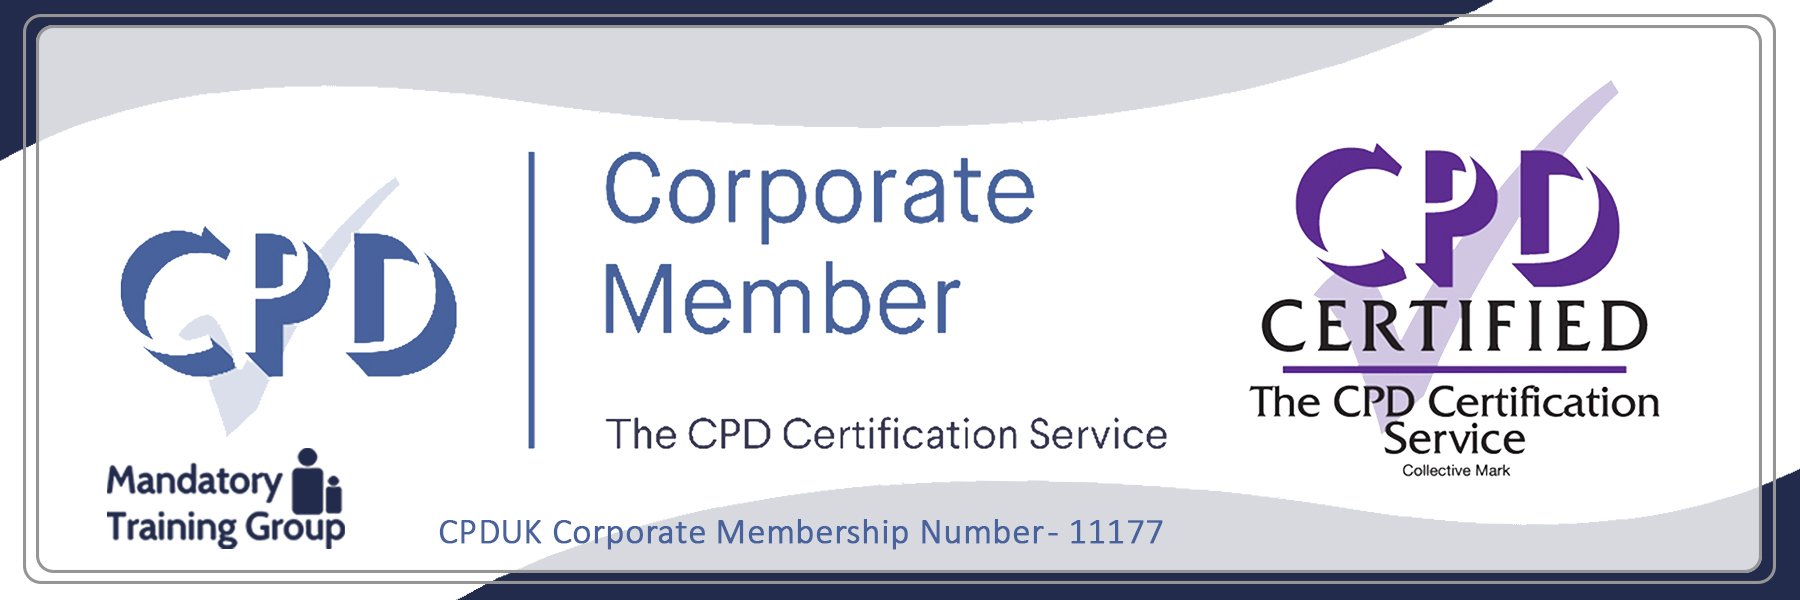 Principles of Leadership and Management - Online CPDUK Accredited Certificate - The Mandatory Training Group UK -